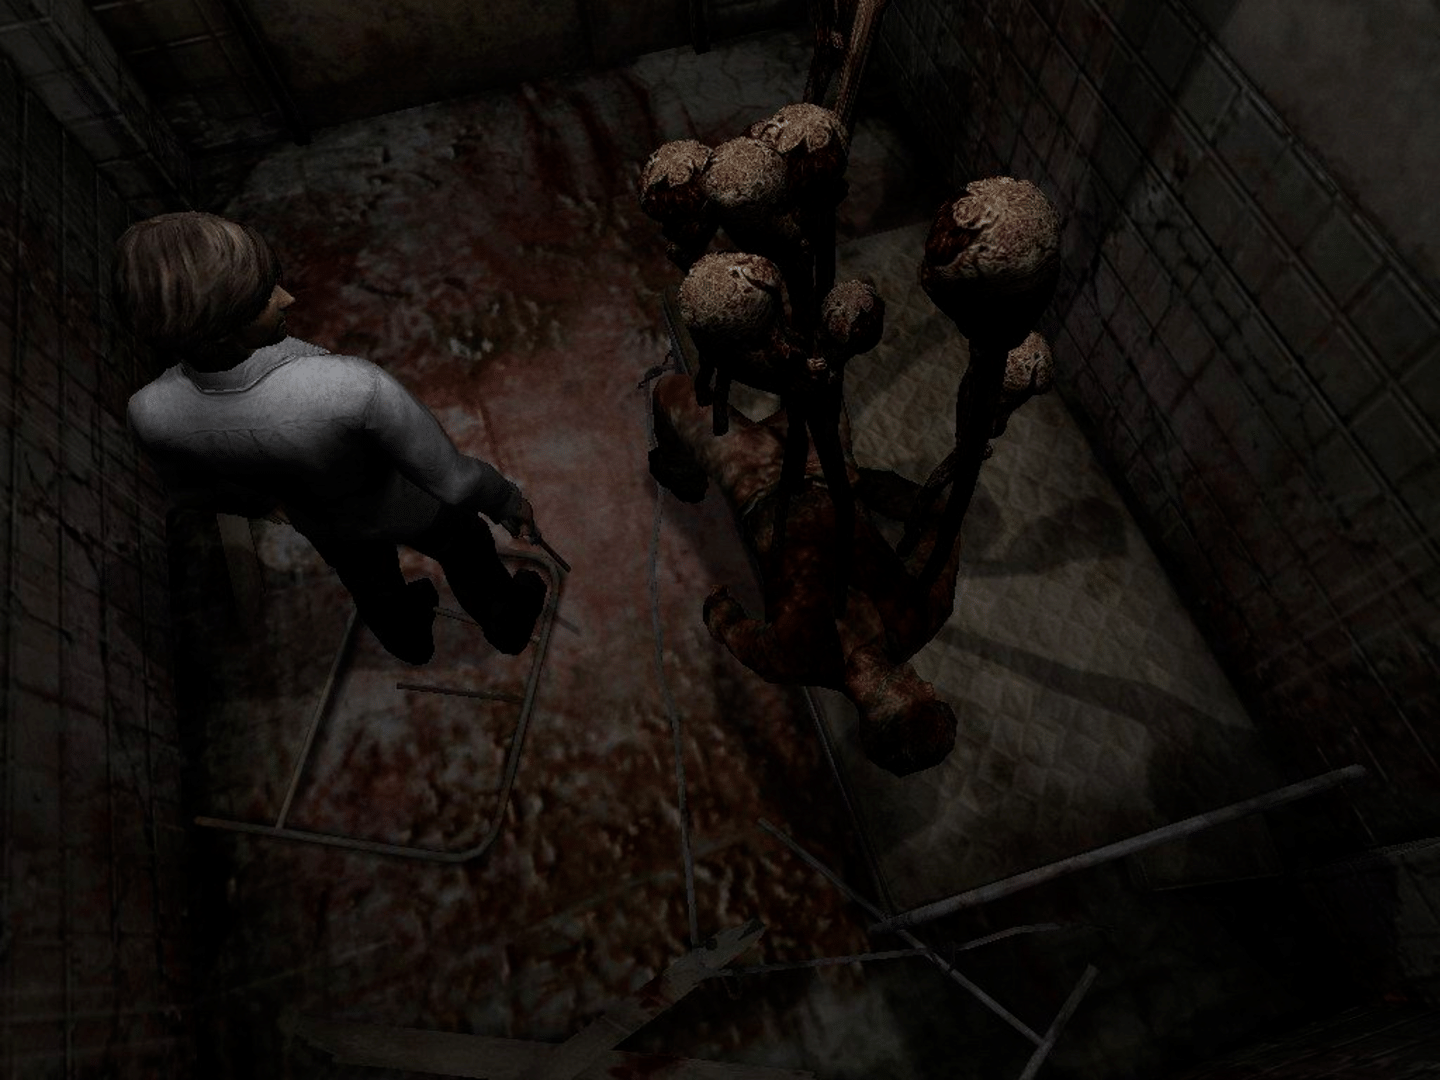 You can now play Silent Hill 4 on GOG